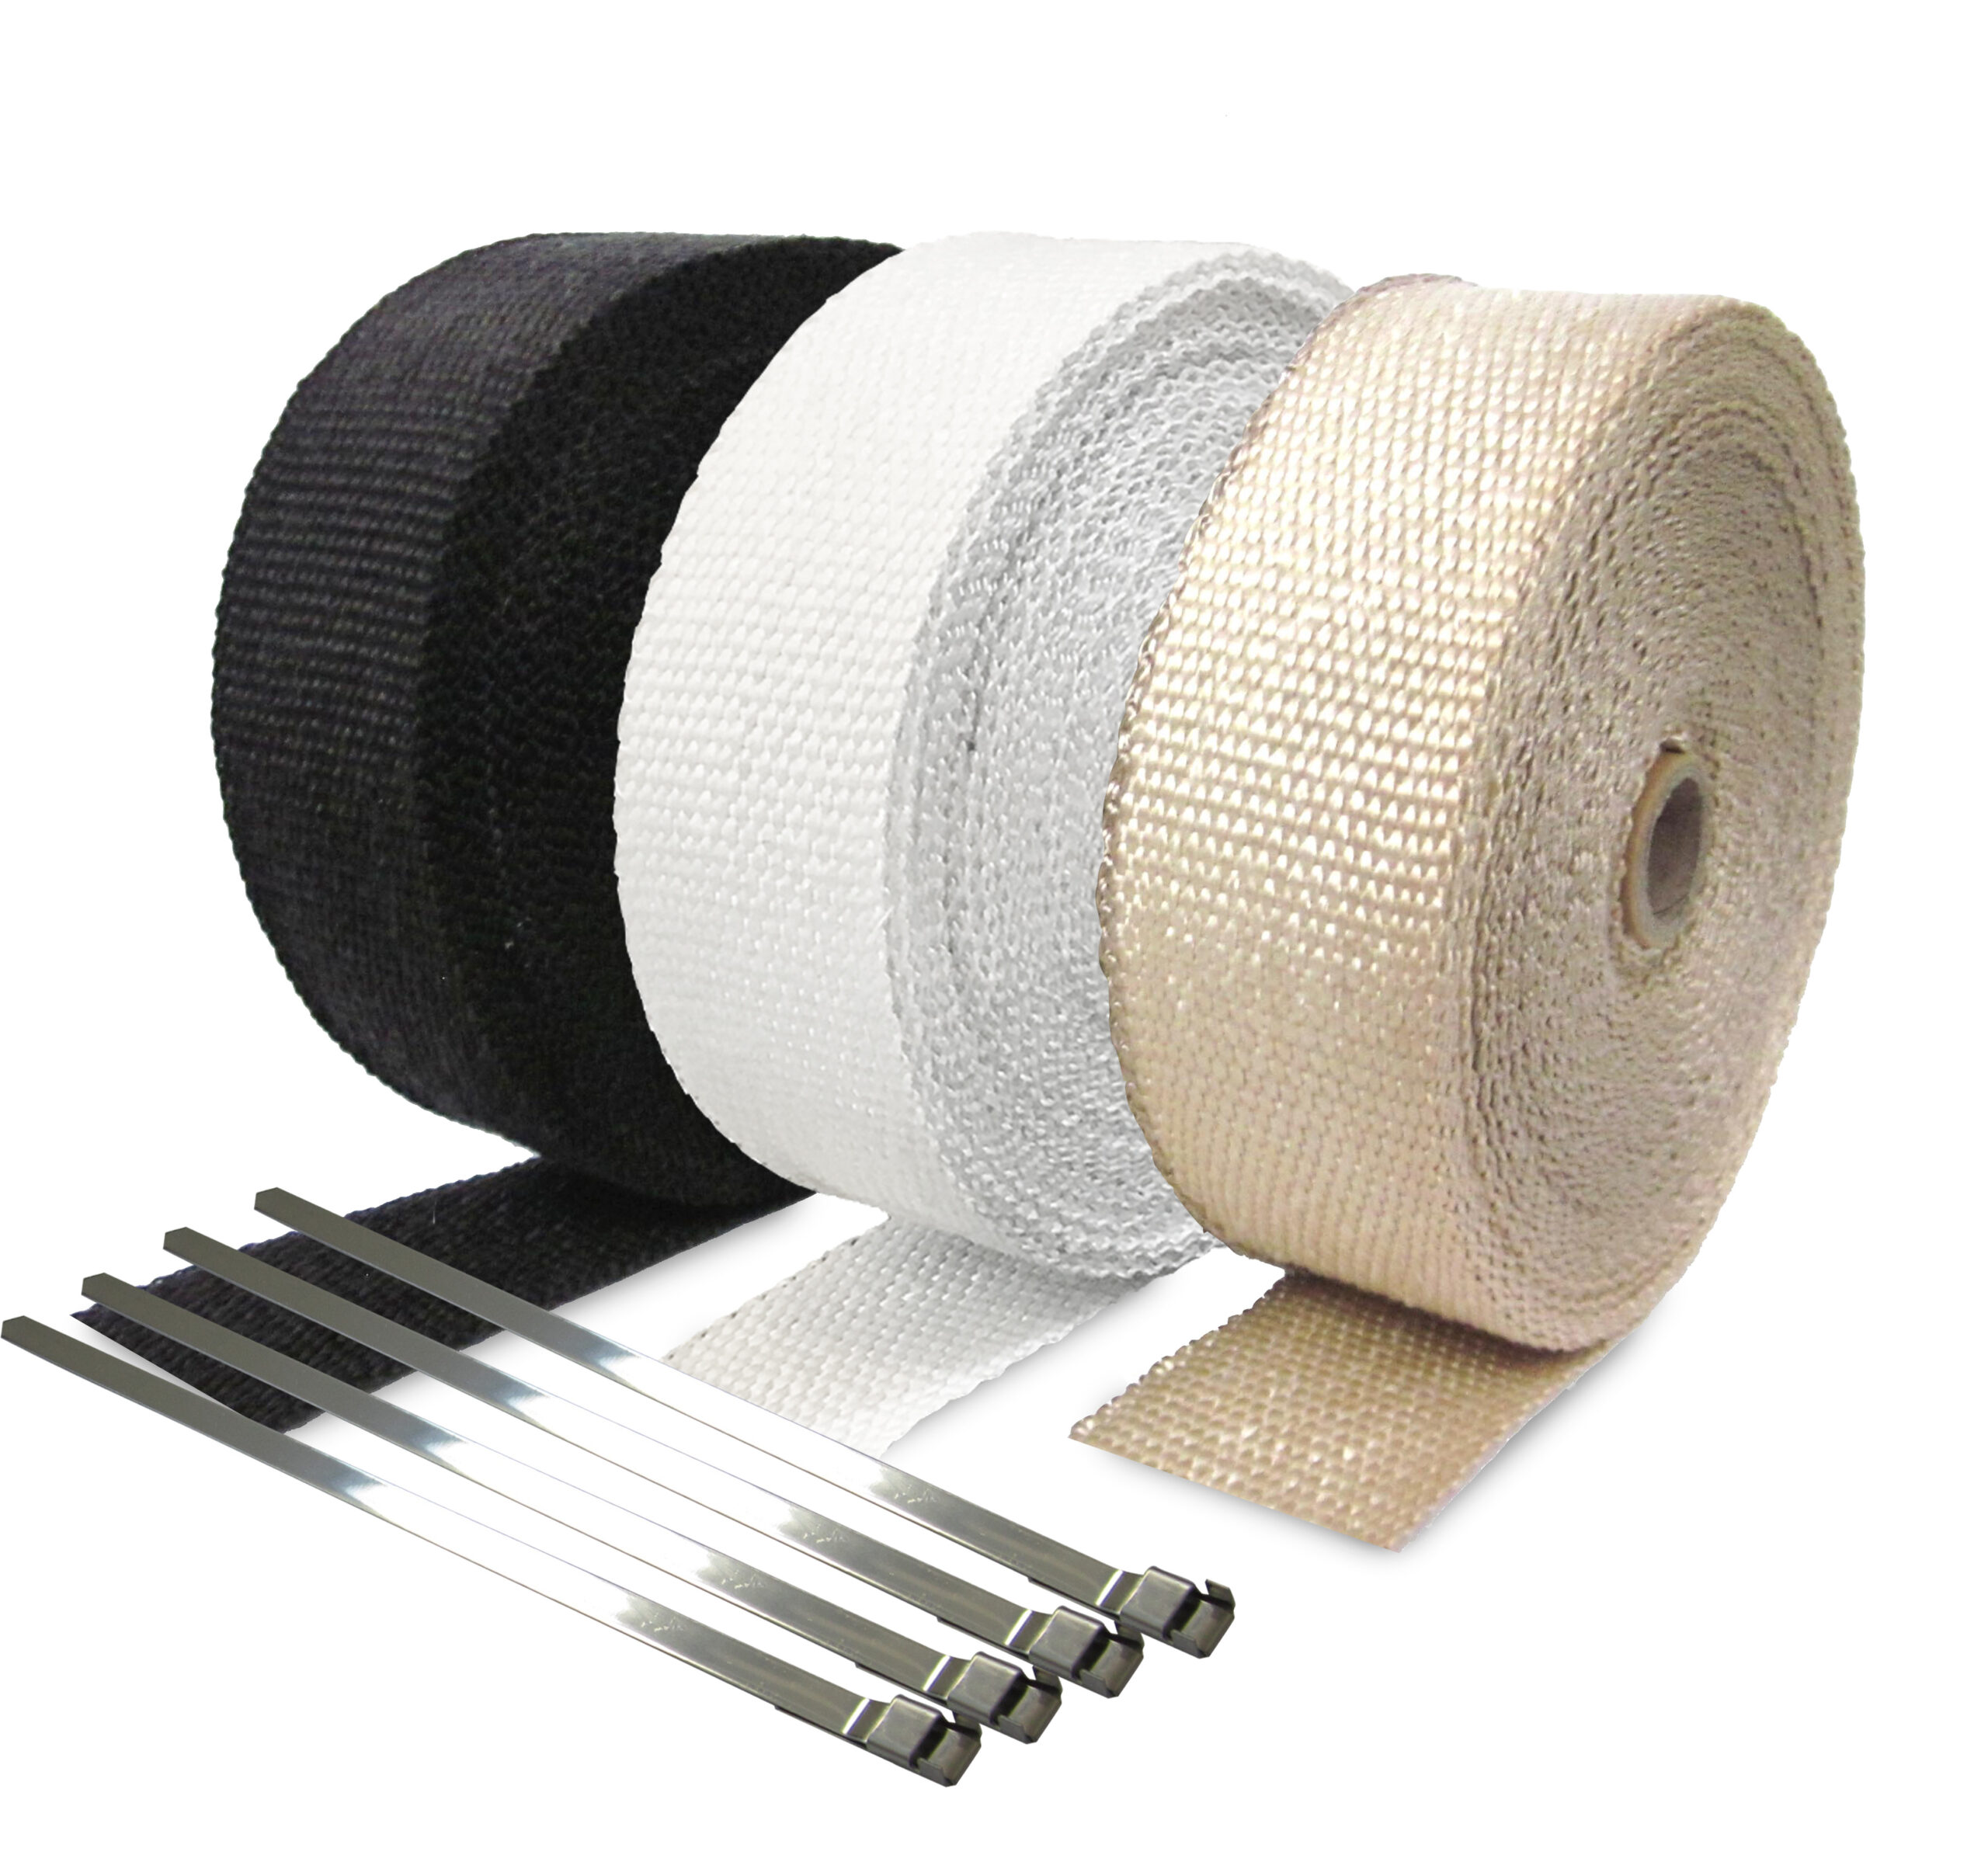 ESUPPORT 5CM X 5M Fiberglass Roll White Racing Exhaust Header Pipe Wrap Tape 6 Ties Car 